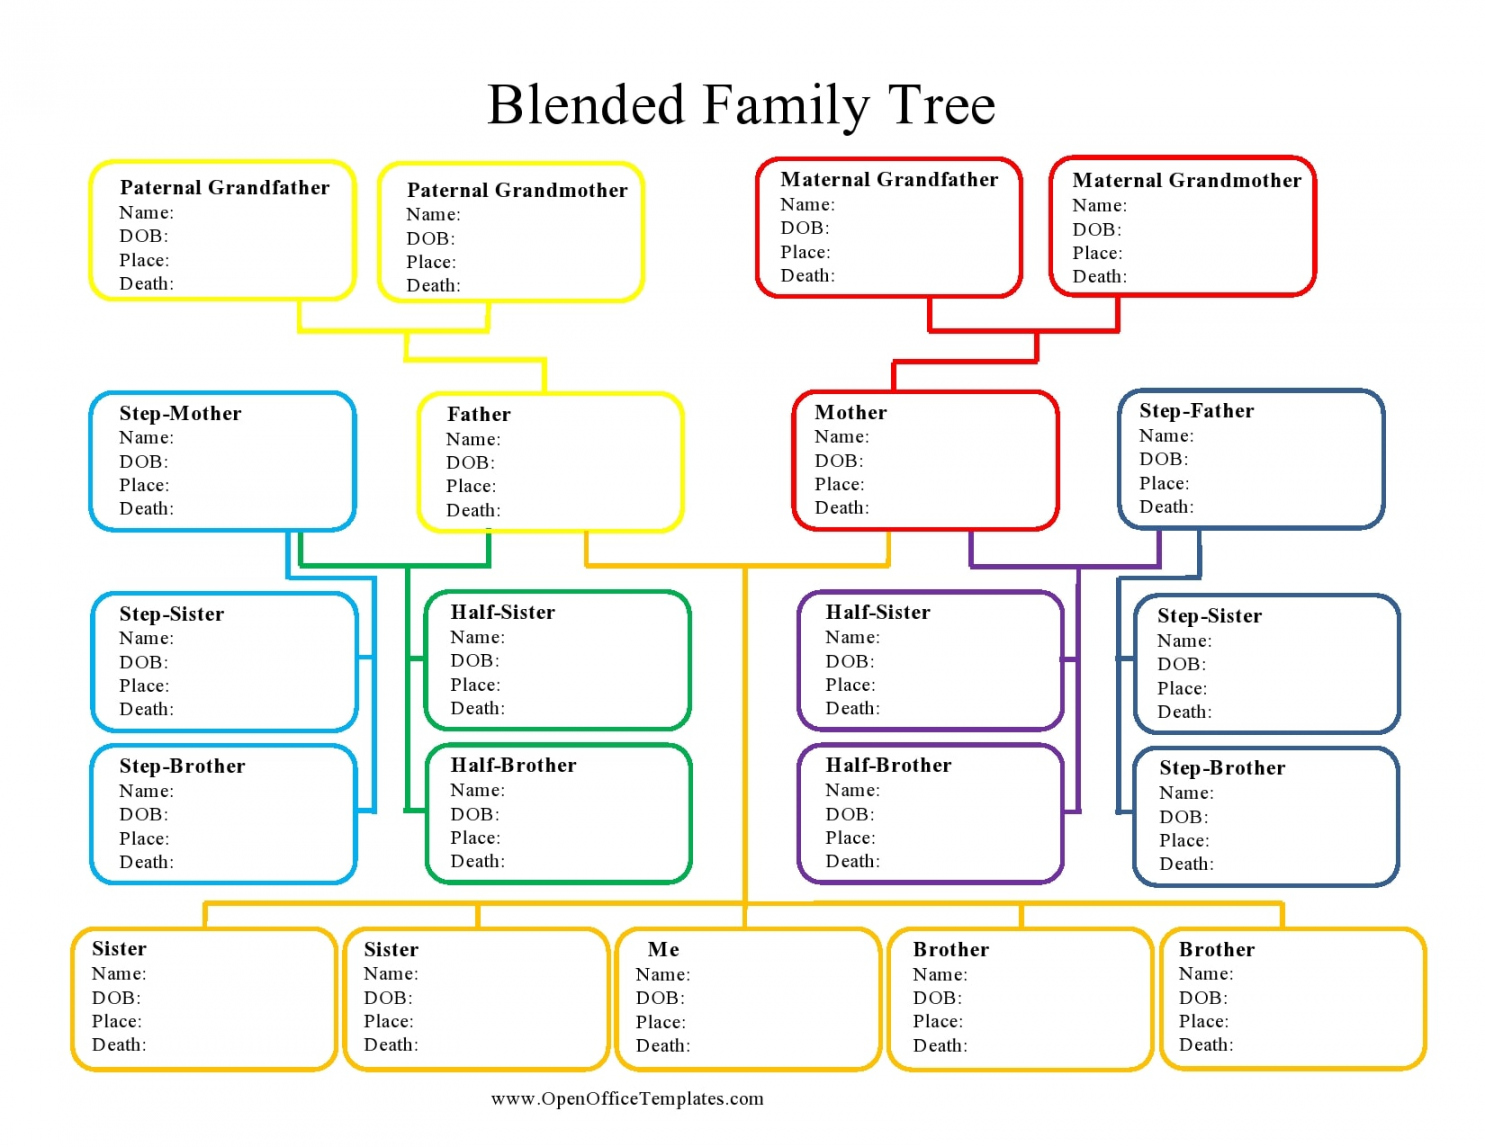 Editable Family Tree Templates [% Free] - TemplateArchive